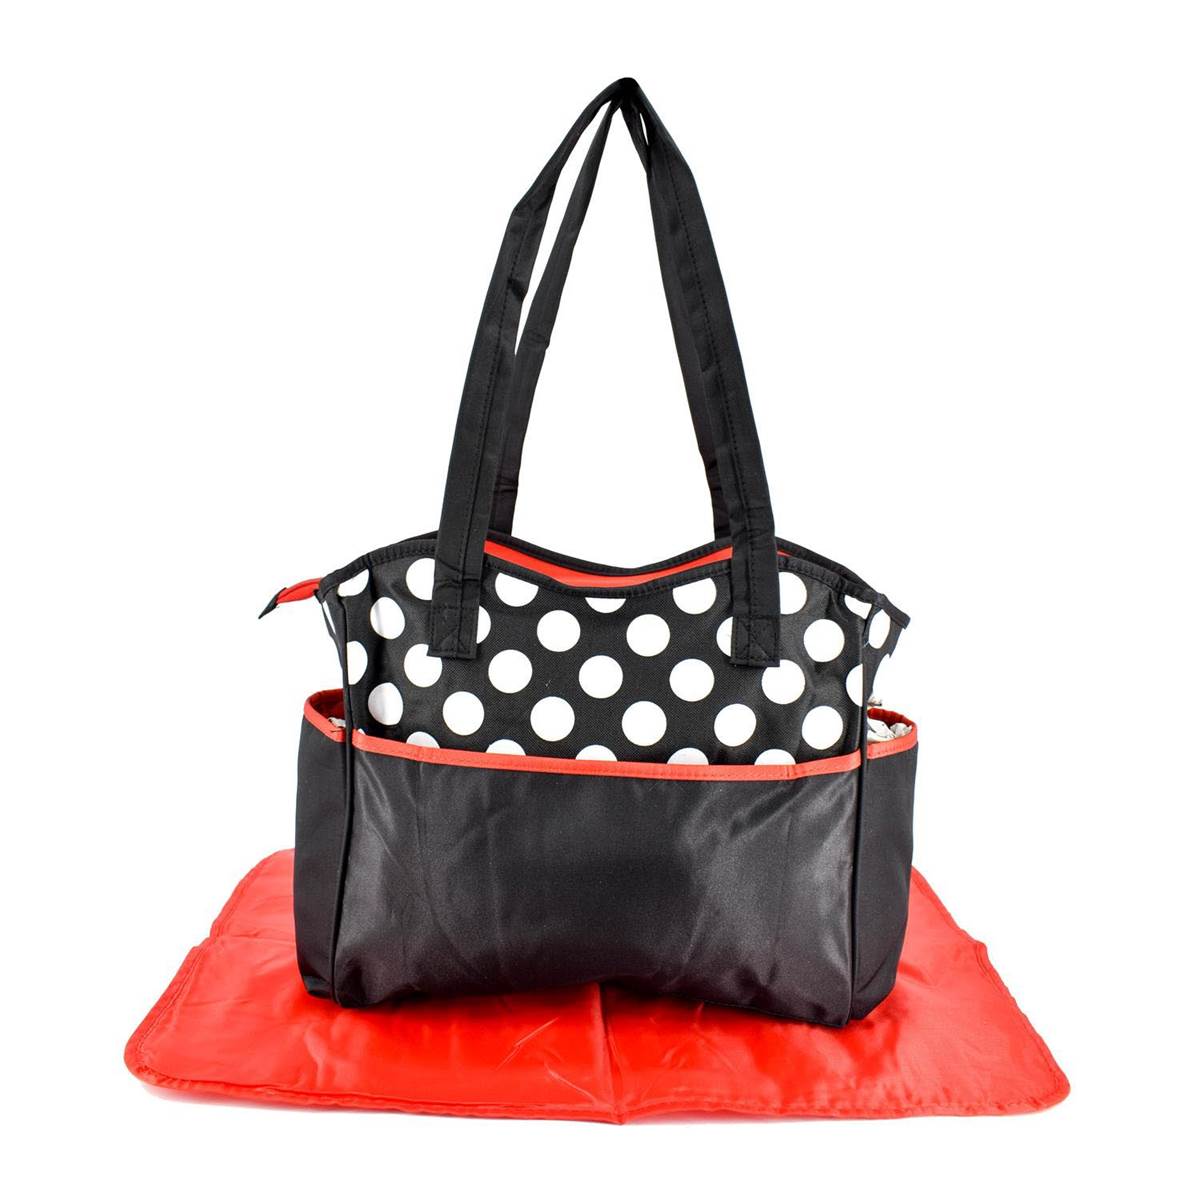 Kookee Mother Bag with Diaper Changing Mat - Black/Red & White Dot